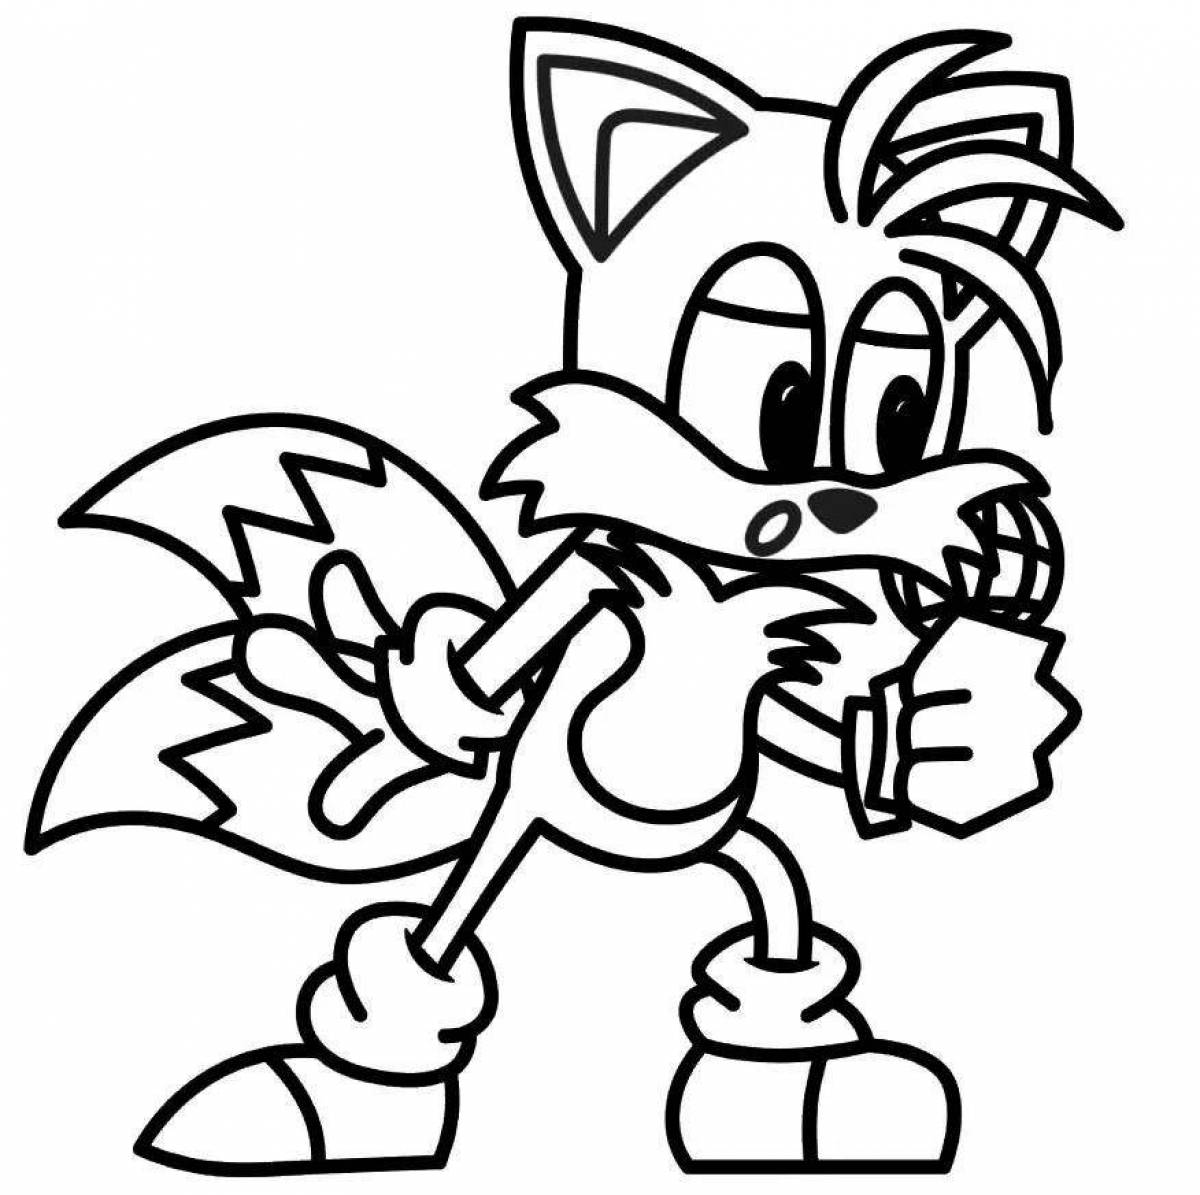 Tempting coloring sonicexe fnf